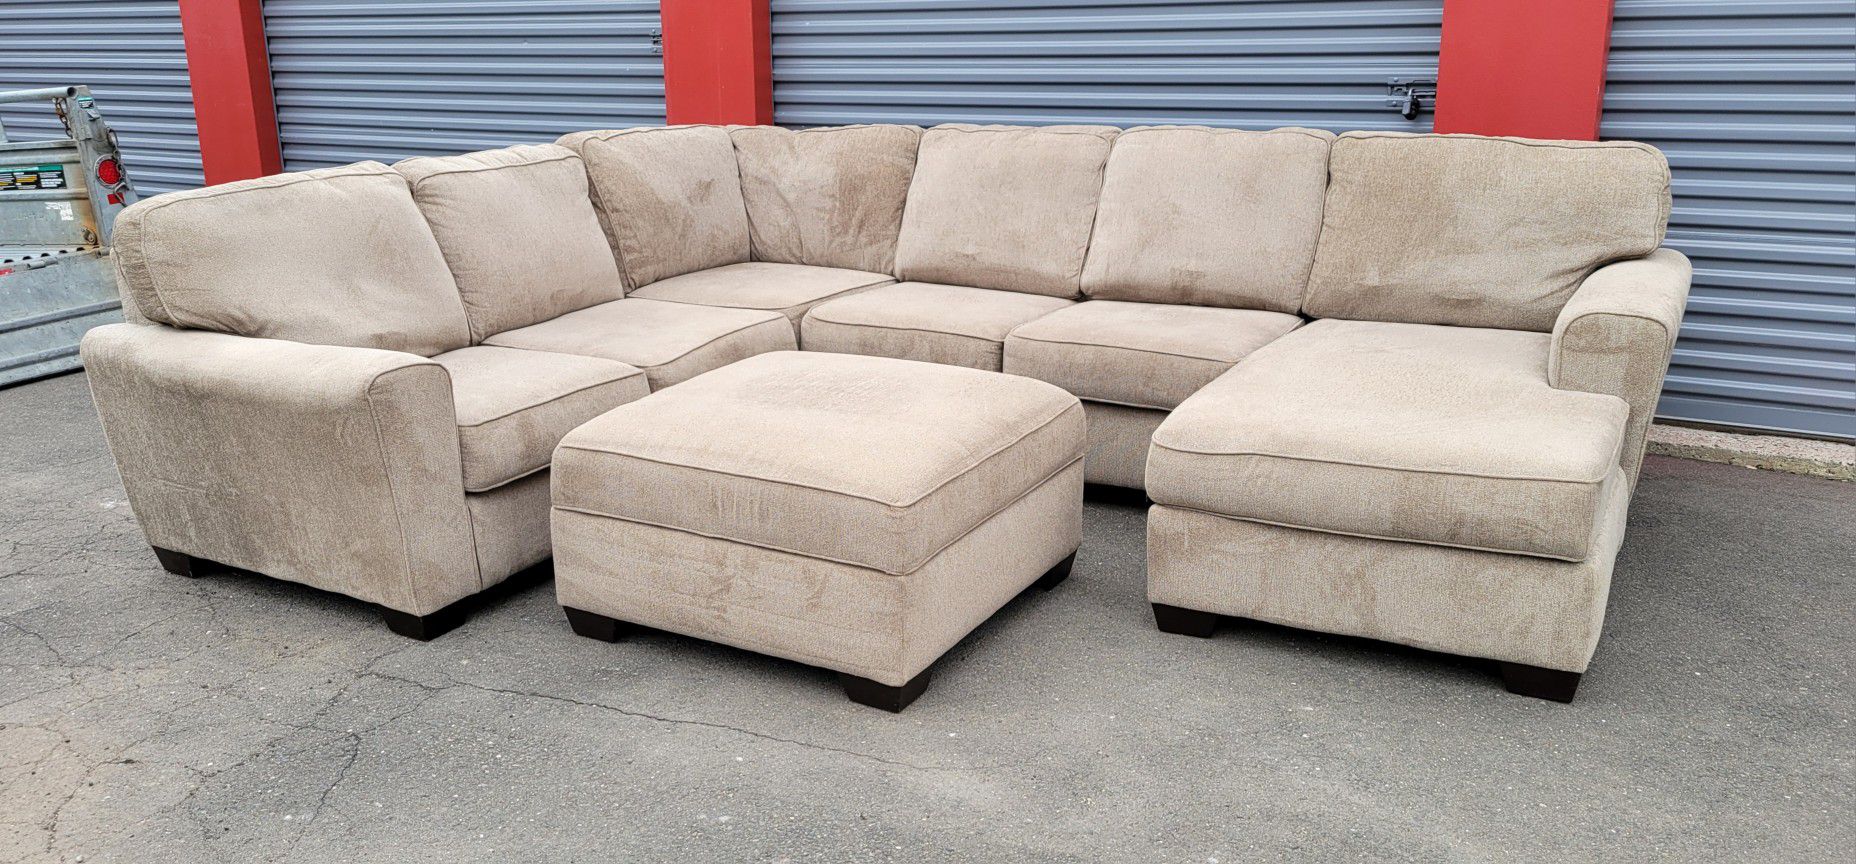 Large 5 Piece Sectional Couch With Ottoman